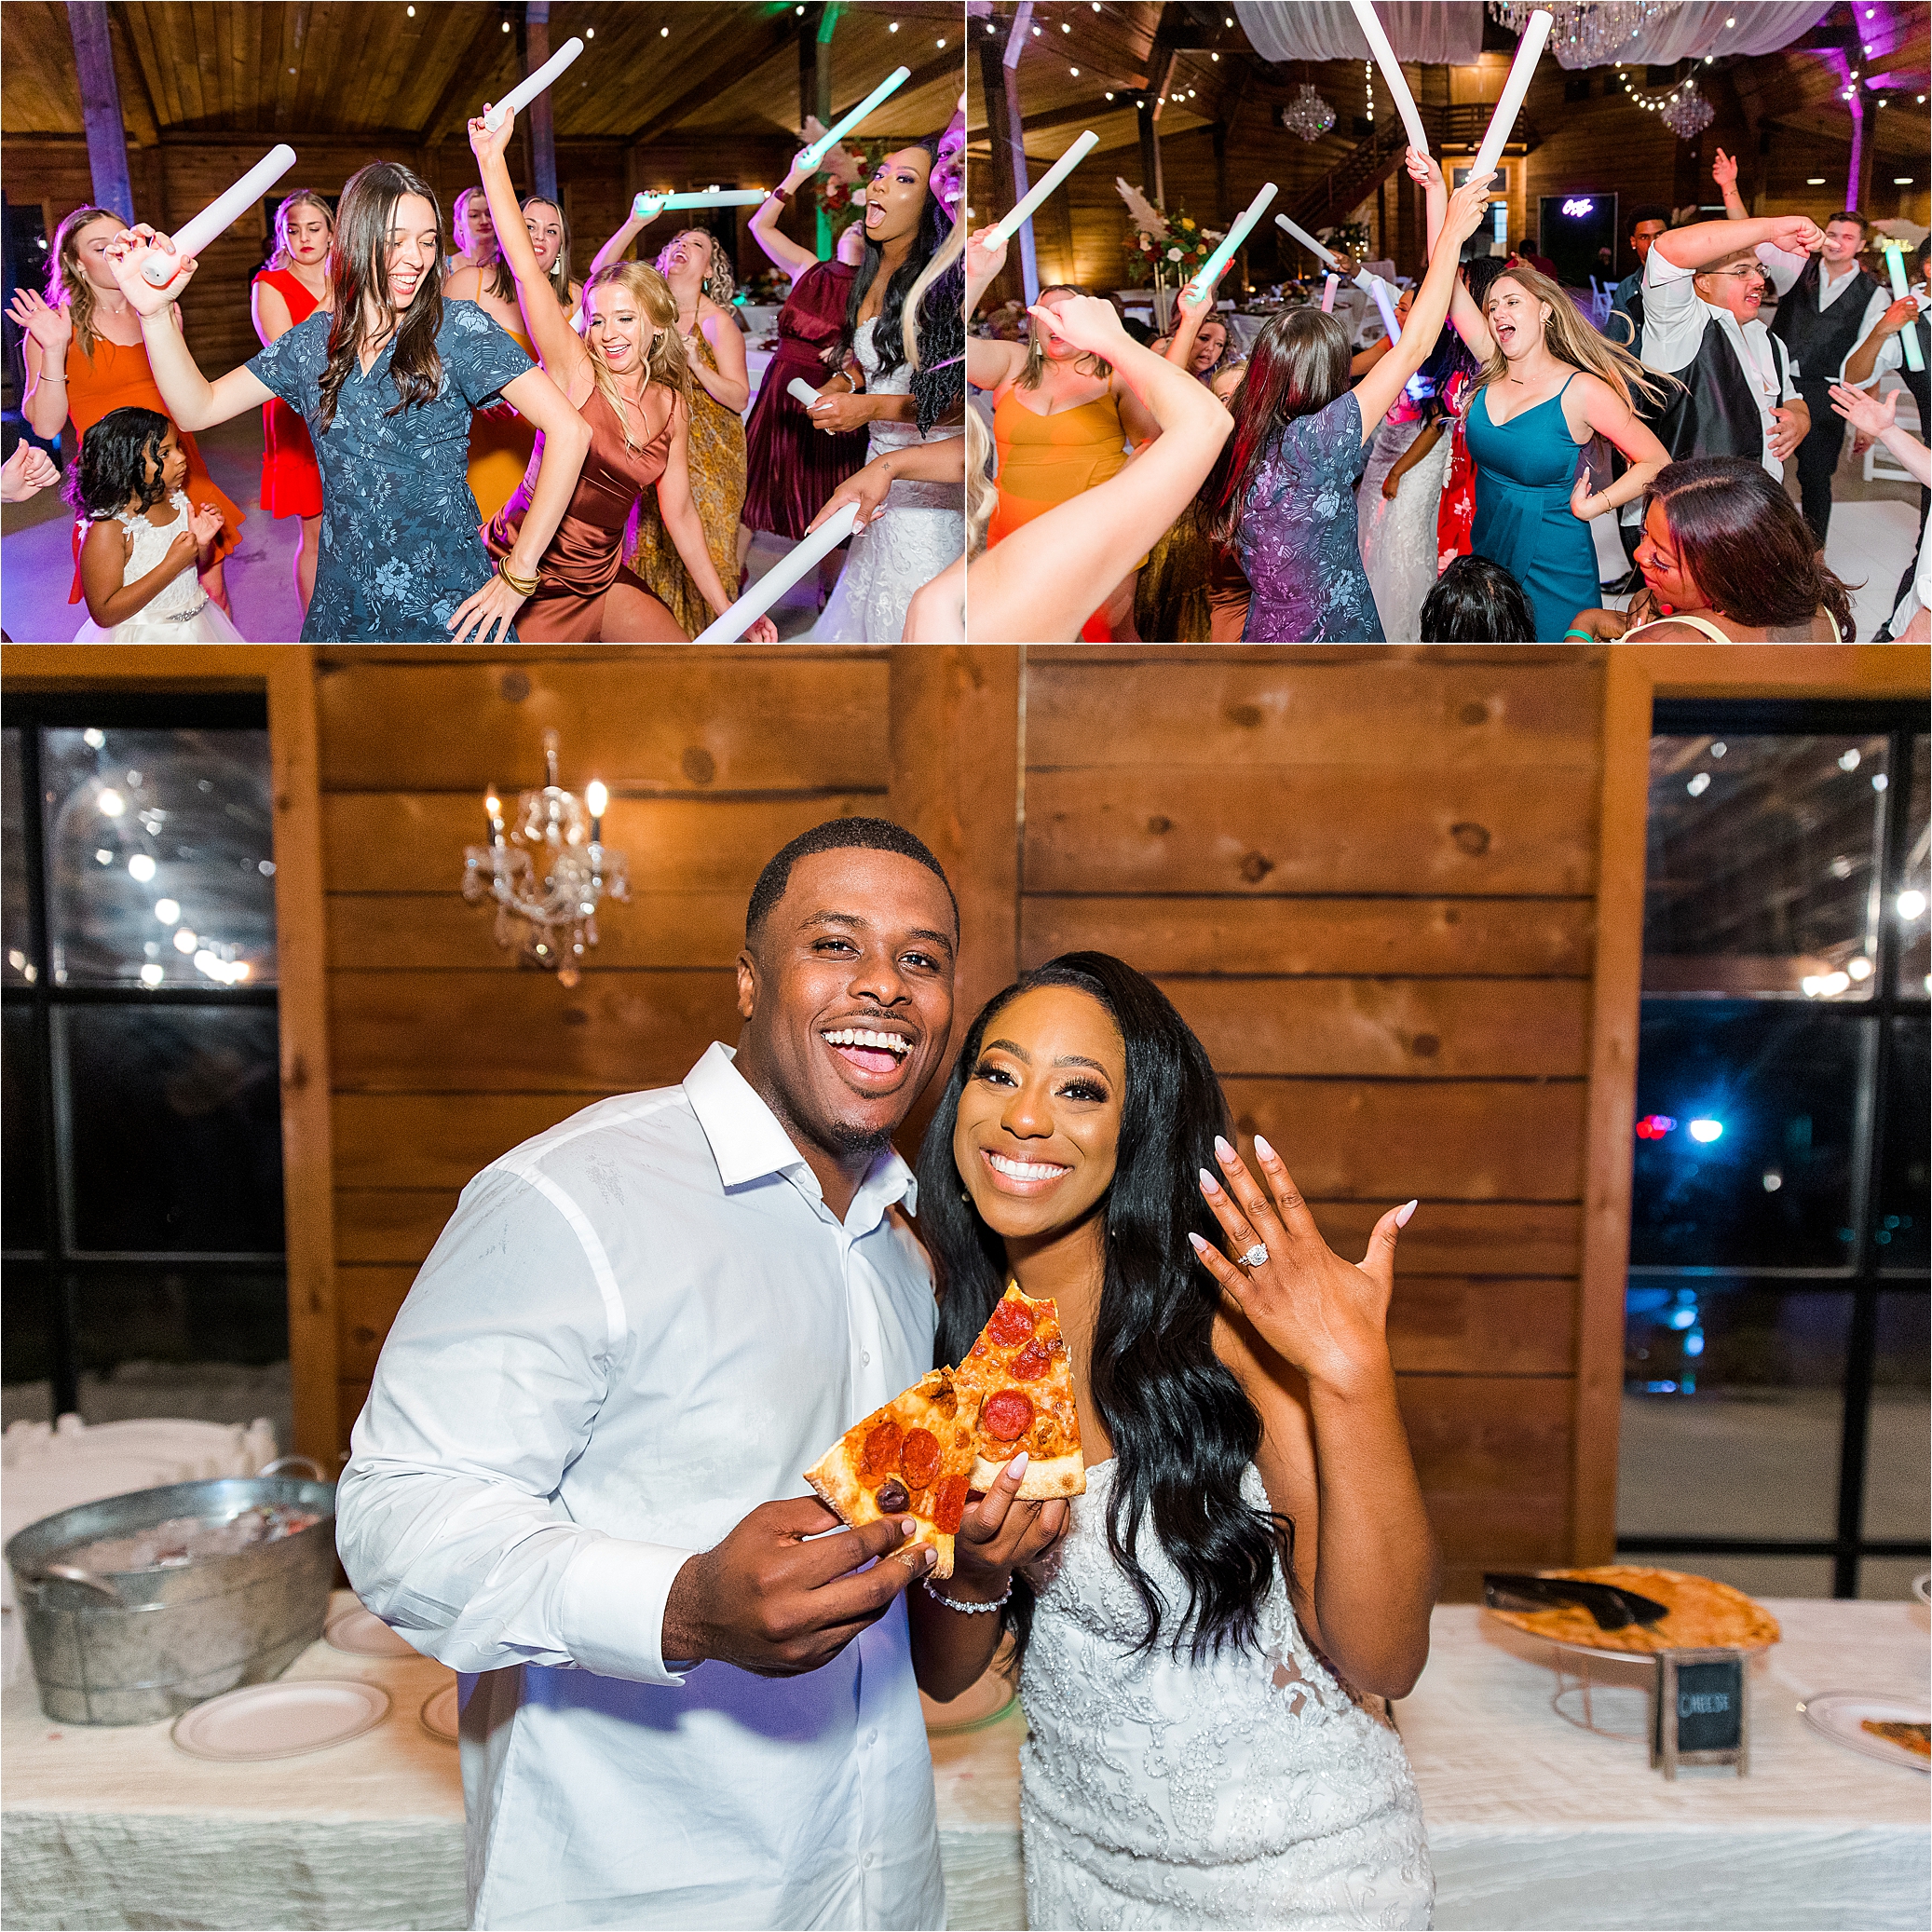 A bride and groom eat pizza and guests dance at their Morgan Creek Wedding Reception 